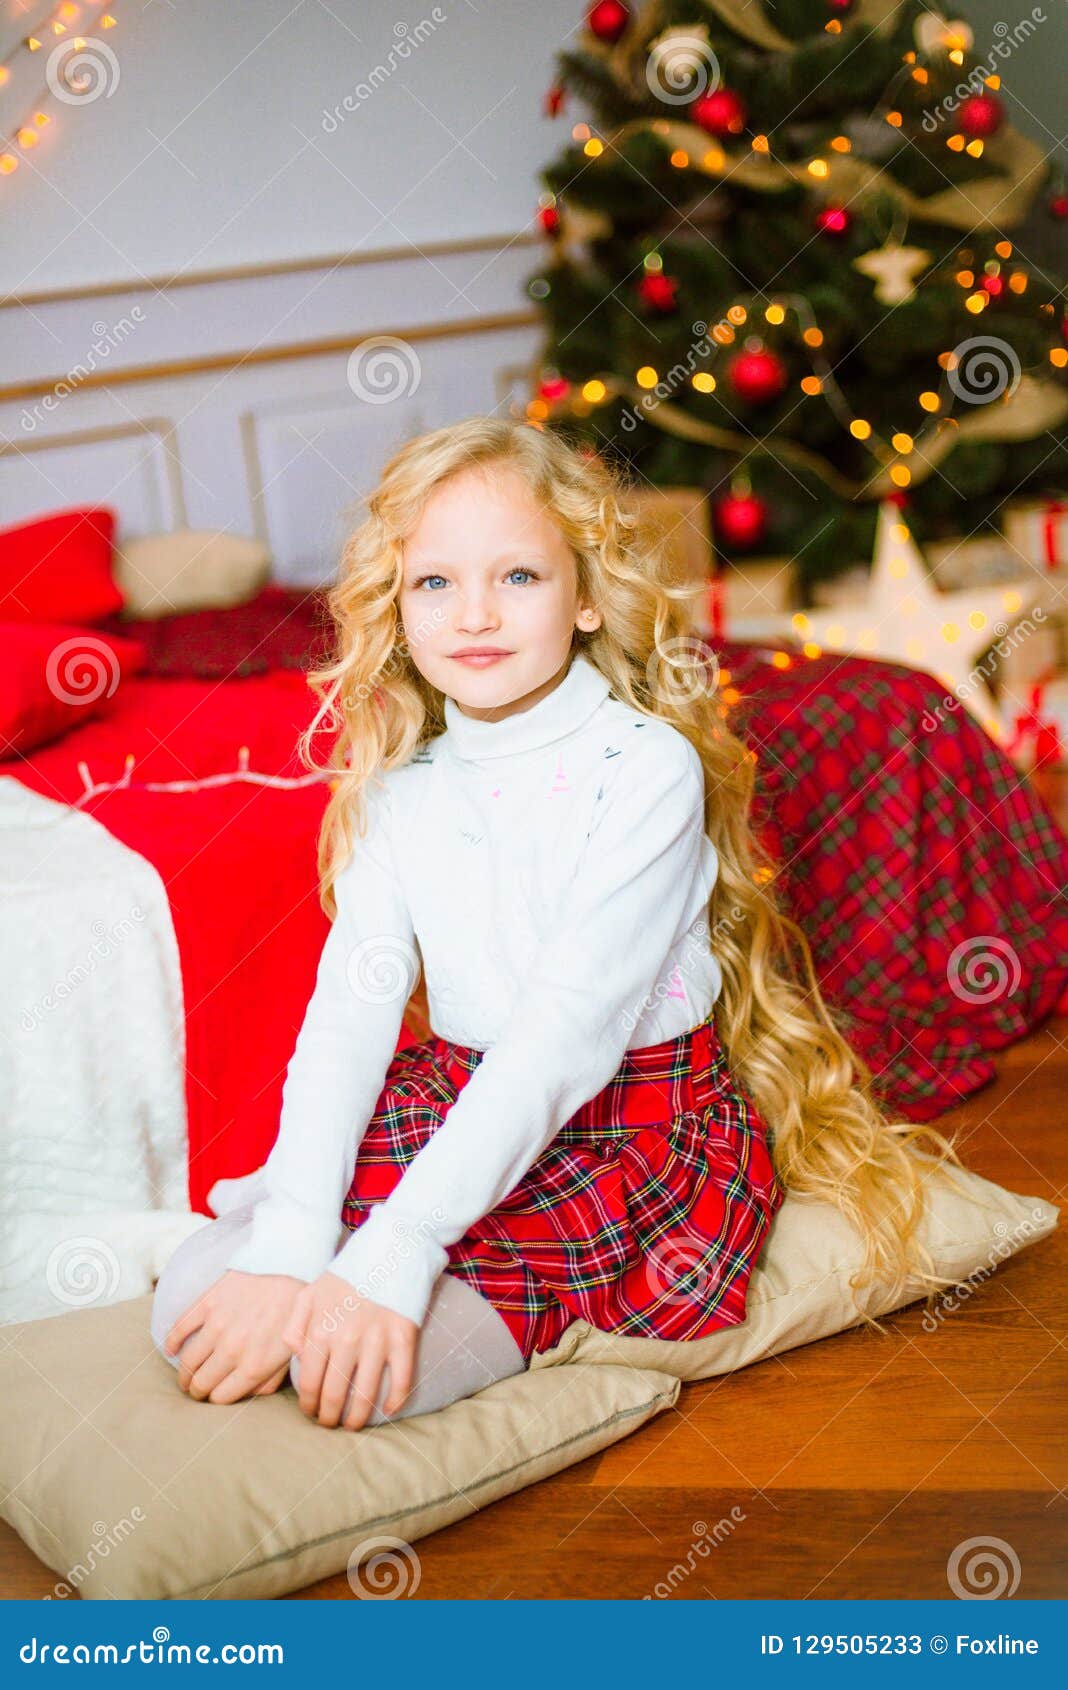 Little Girl With Blond Long Curly Hair At